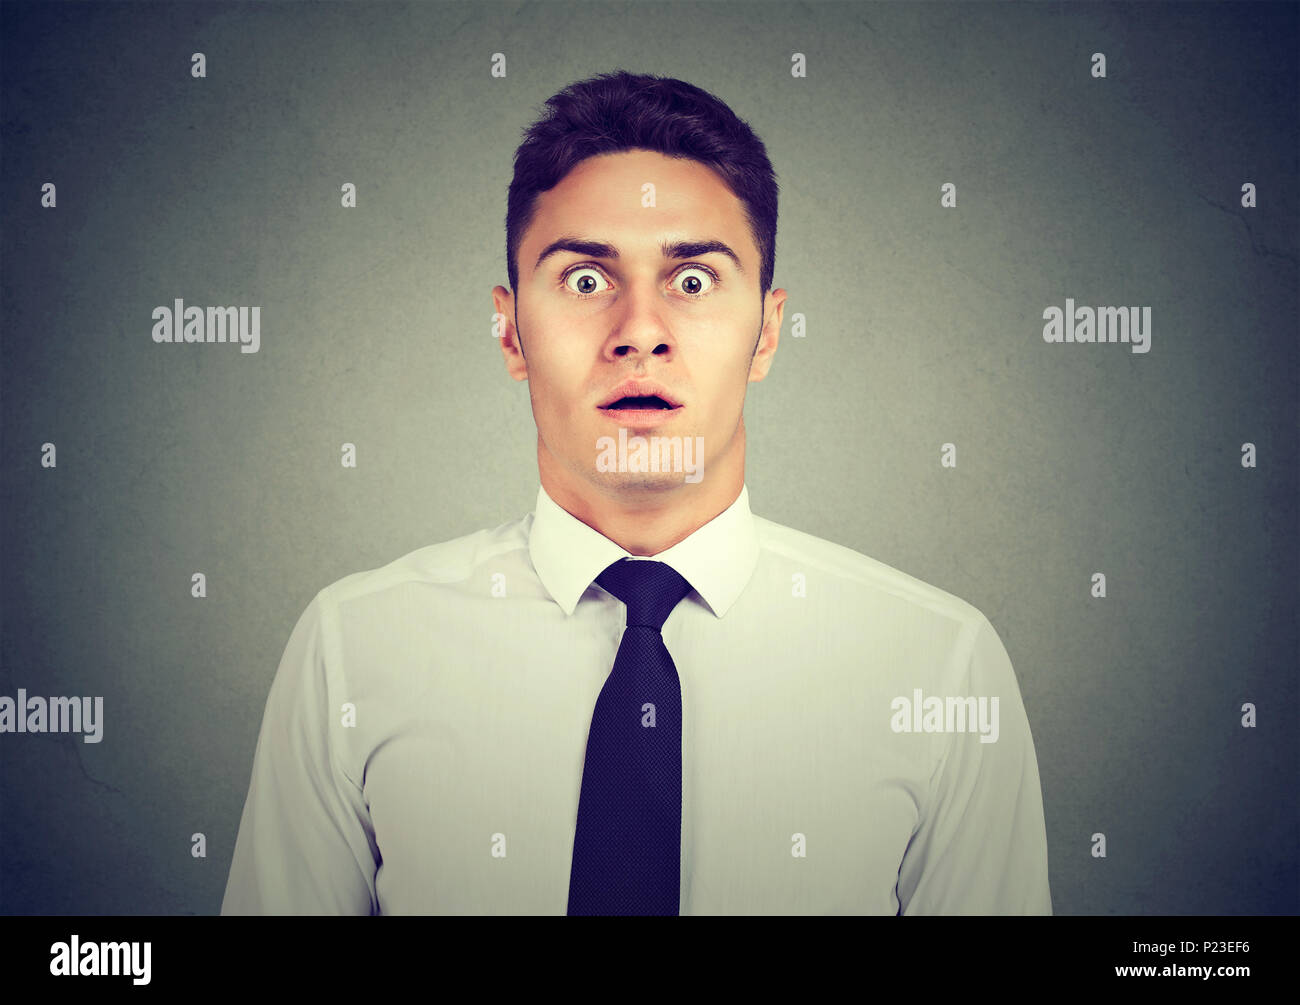 Scared stunned young business man looking at camera Stock Photo